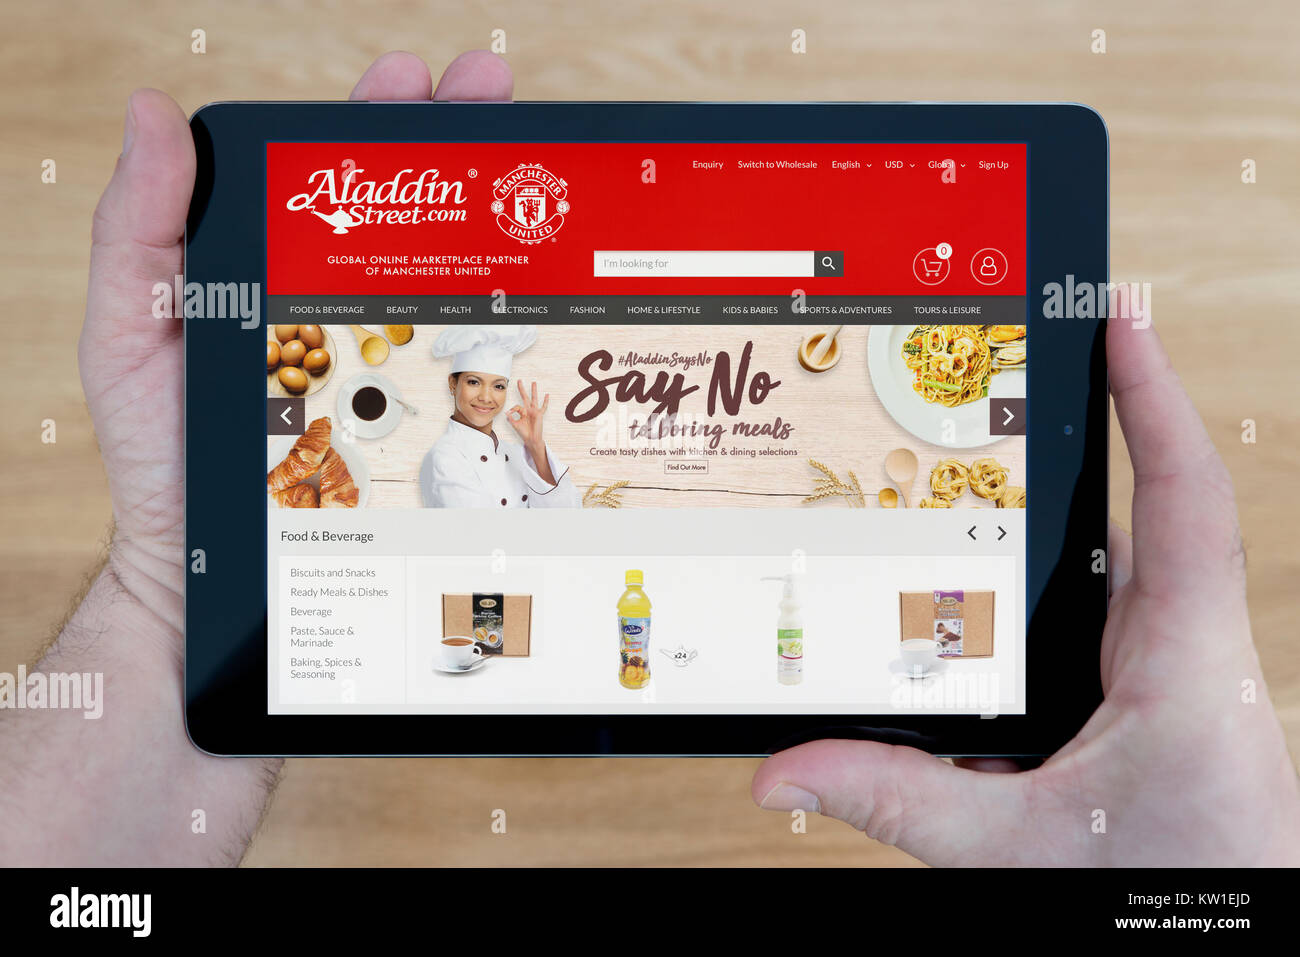 A man looks at the Aladdin Street website on his iPad tablet device, shot against a wooden table top background (Editorial use only) Stock Photo